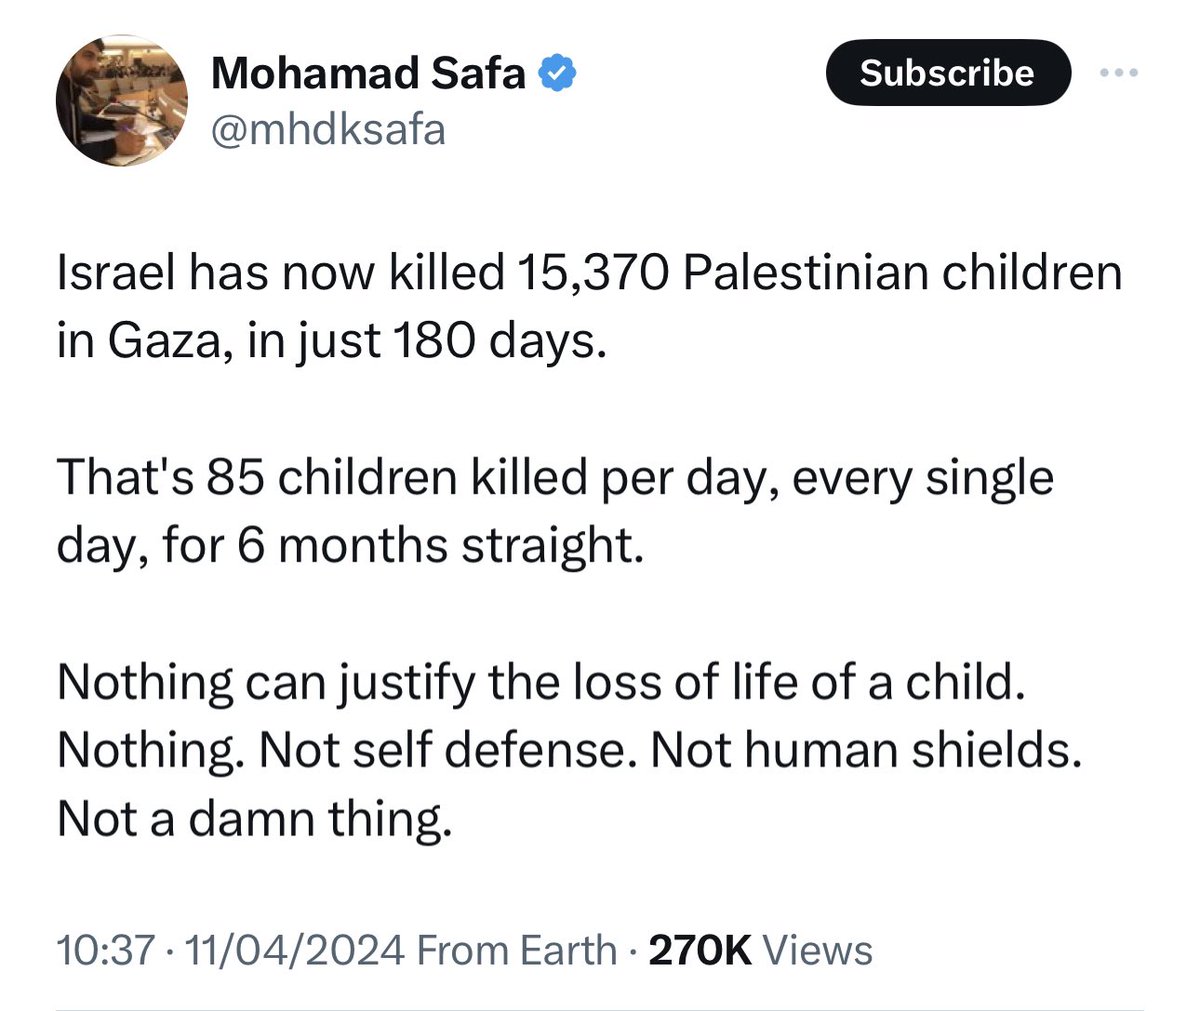 Pretty much the whole Western political establishment has spent 6 months brazenly backing the mass murder of children. The effect on global consciousness will be profound and permanent. There is no way back from this, no matter how much money they throw at their think-tanks.